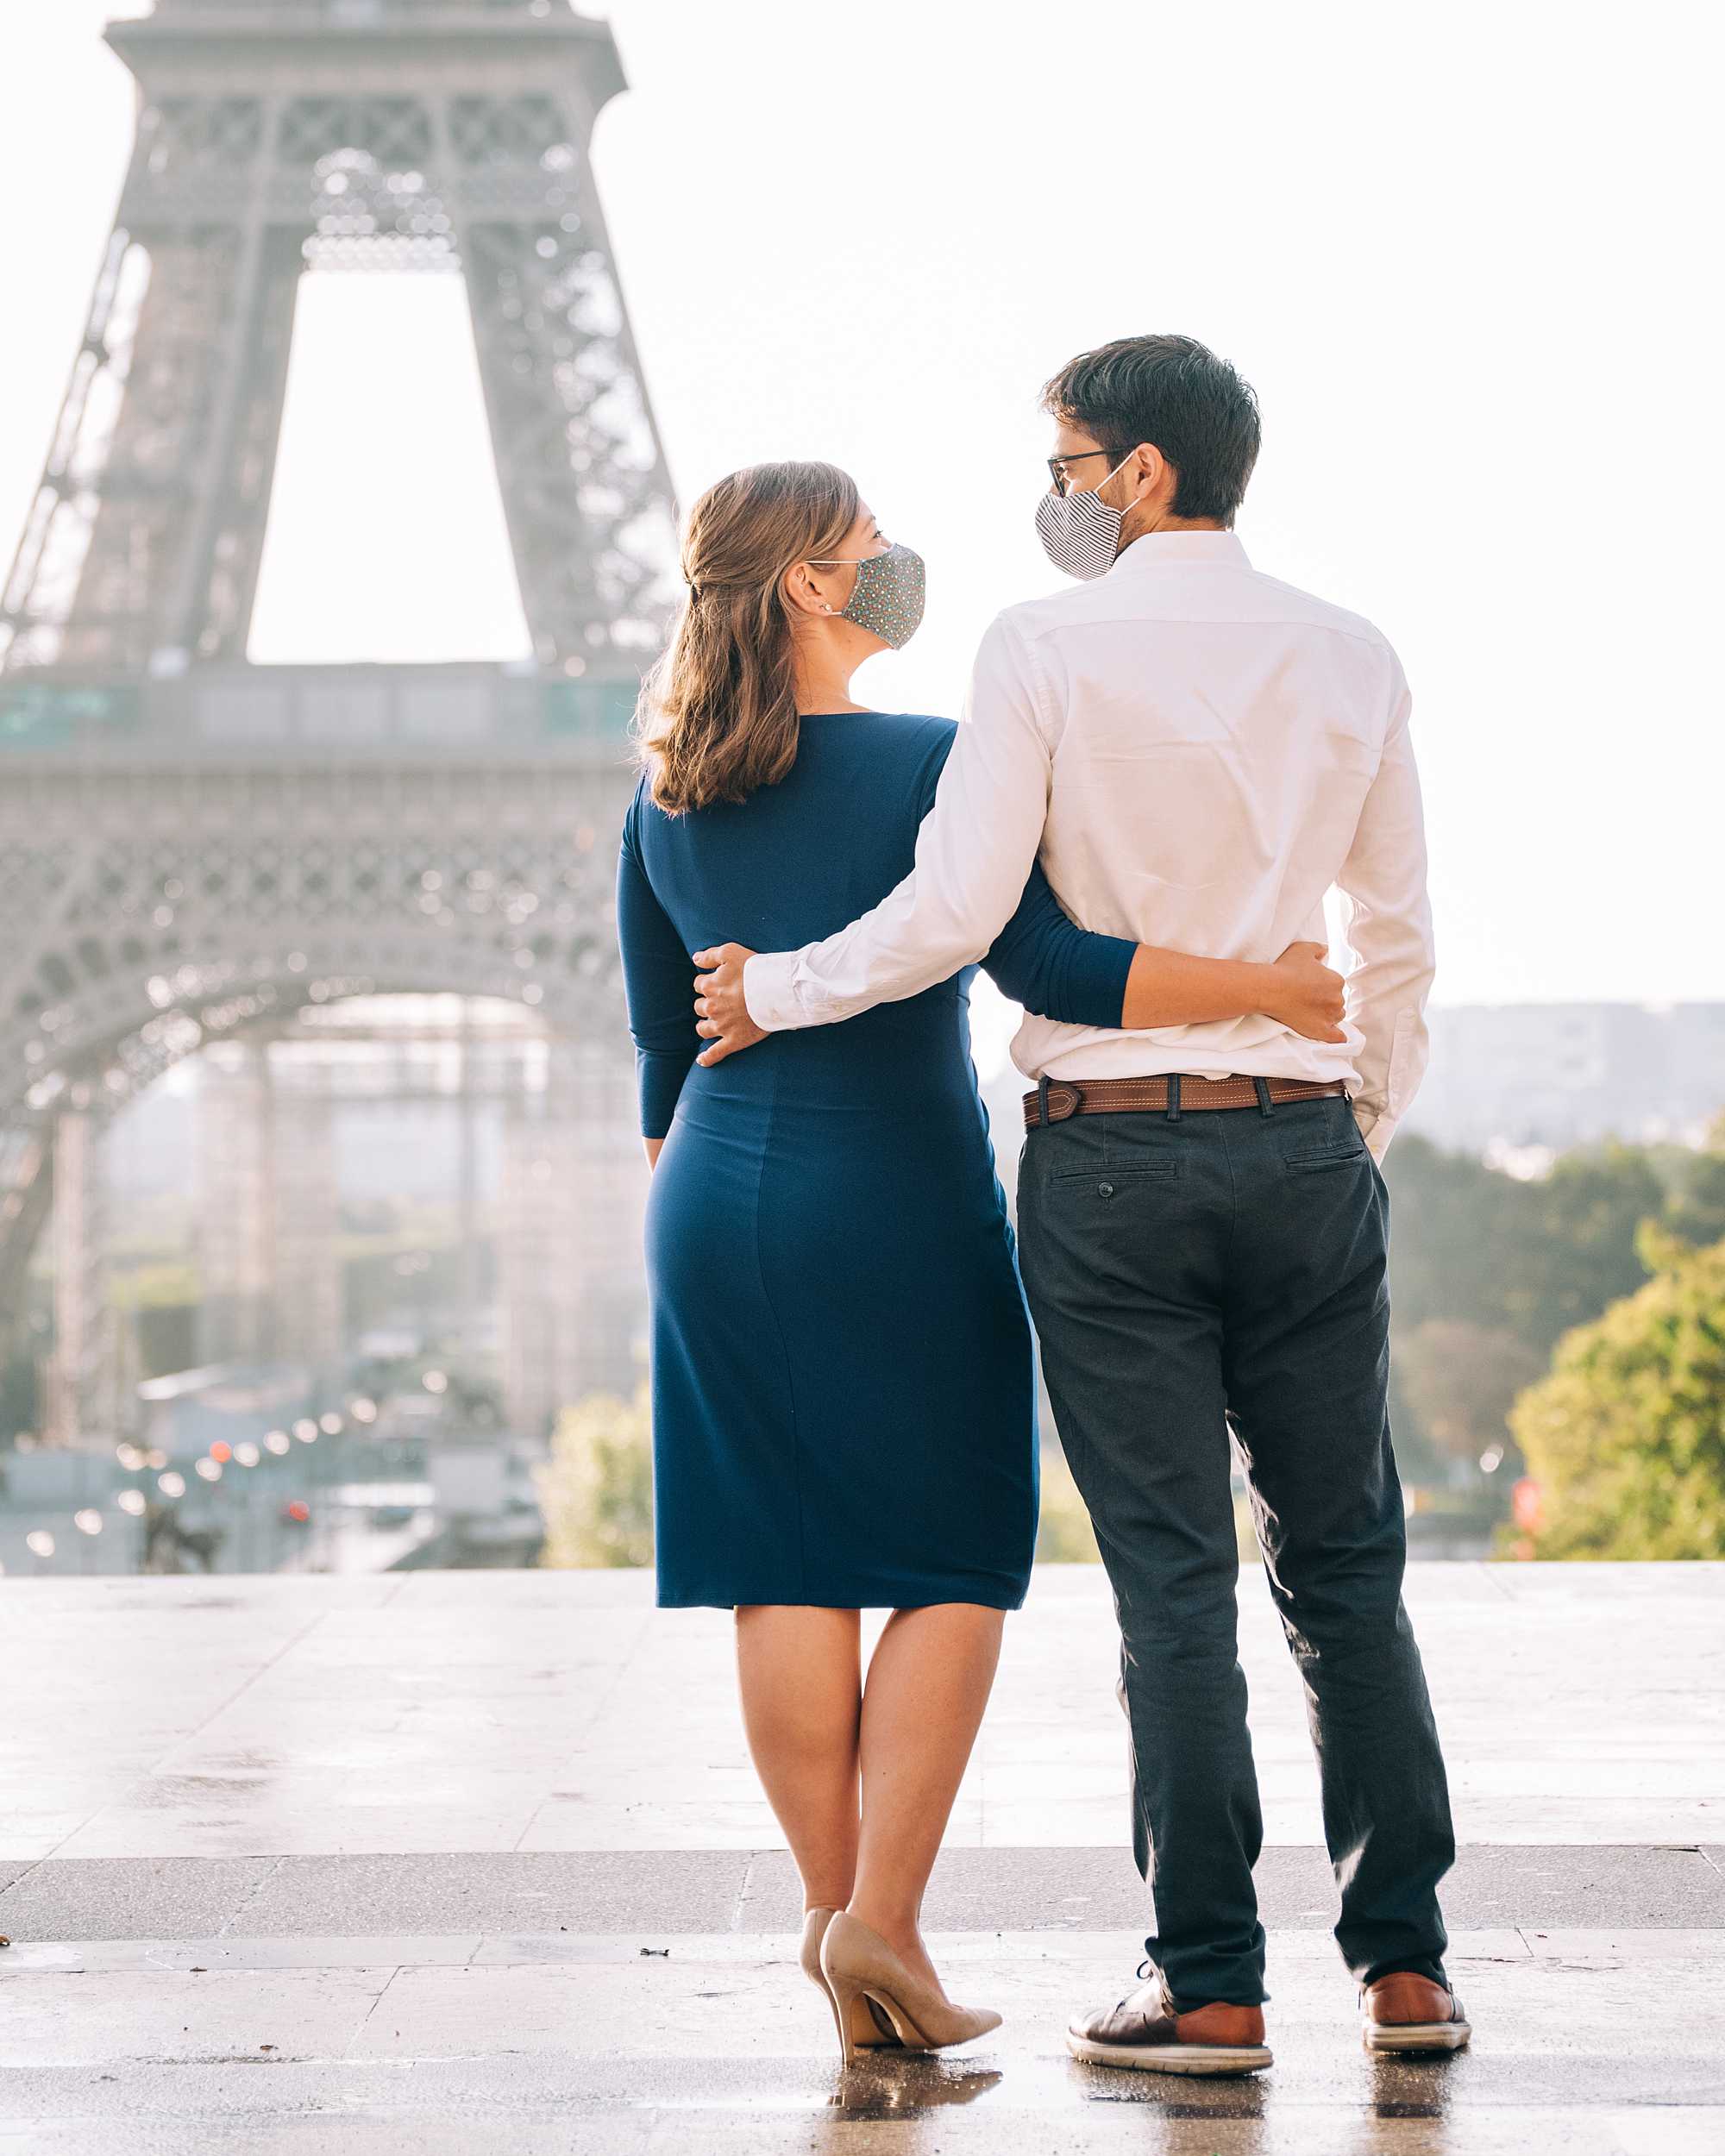 Couple's romantic photo shoot in Paris at the Eiffel Tower, both wearing masks during covid-19. Shot by Paige Elizabeth Gribb